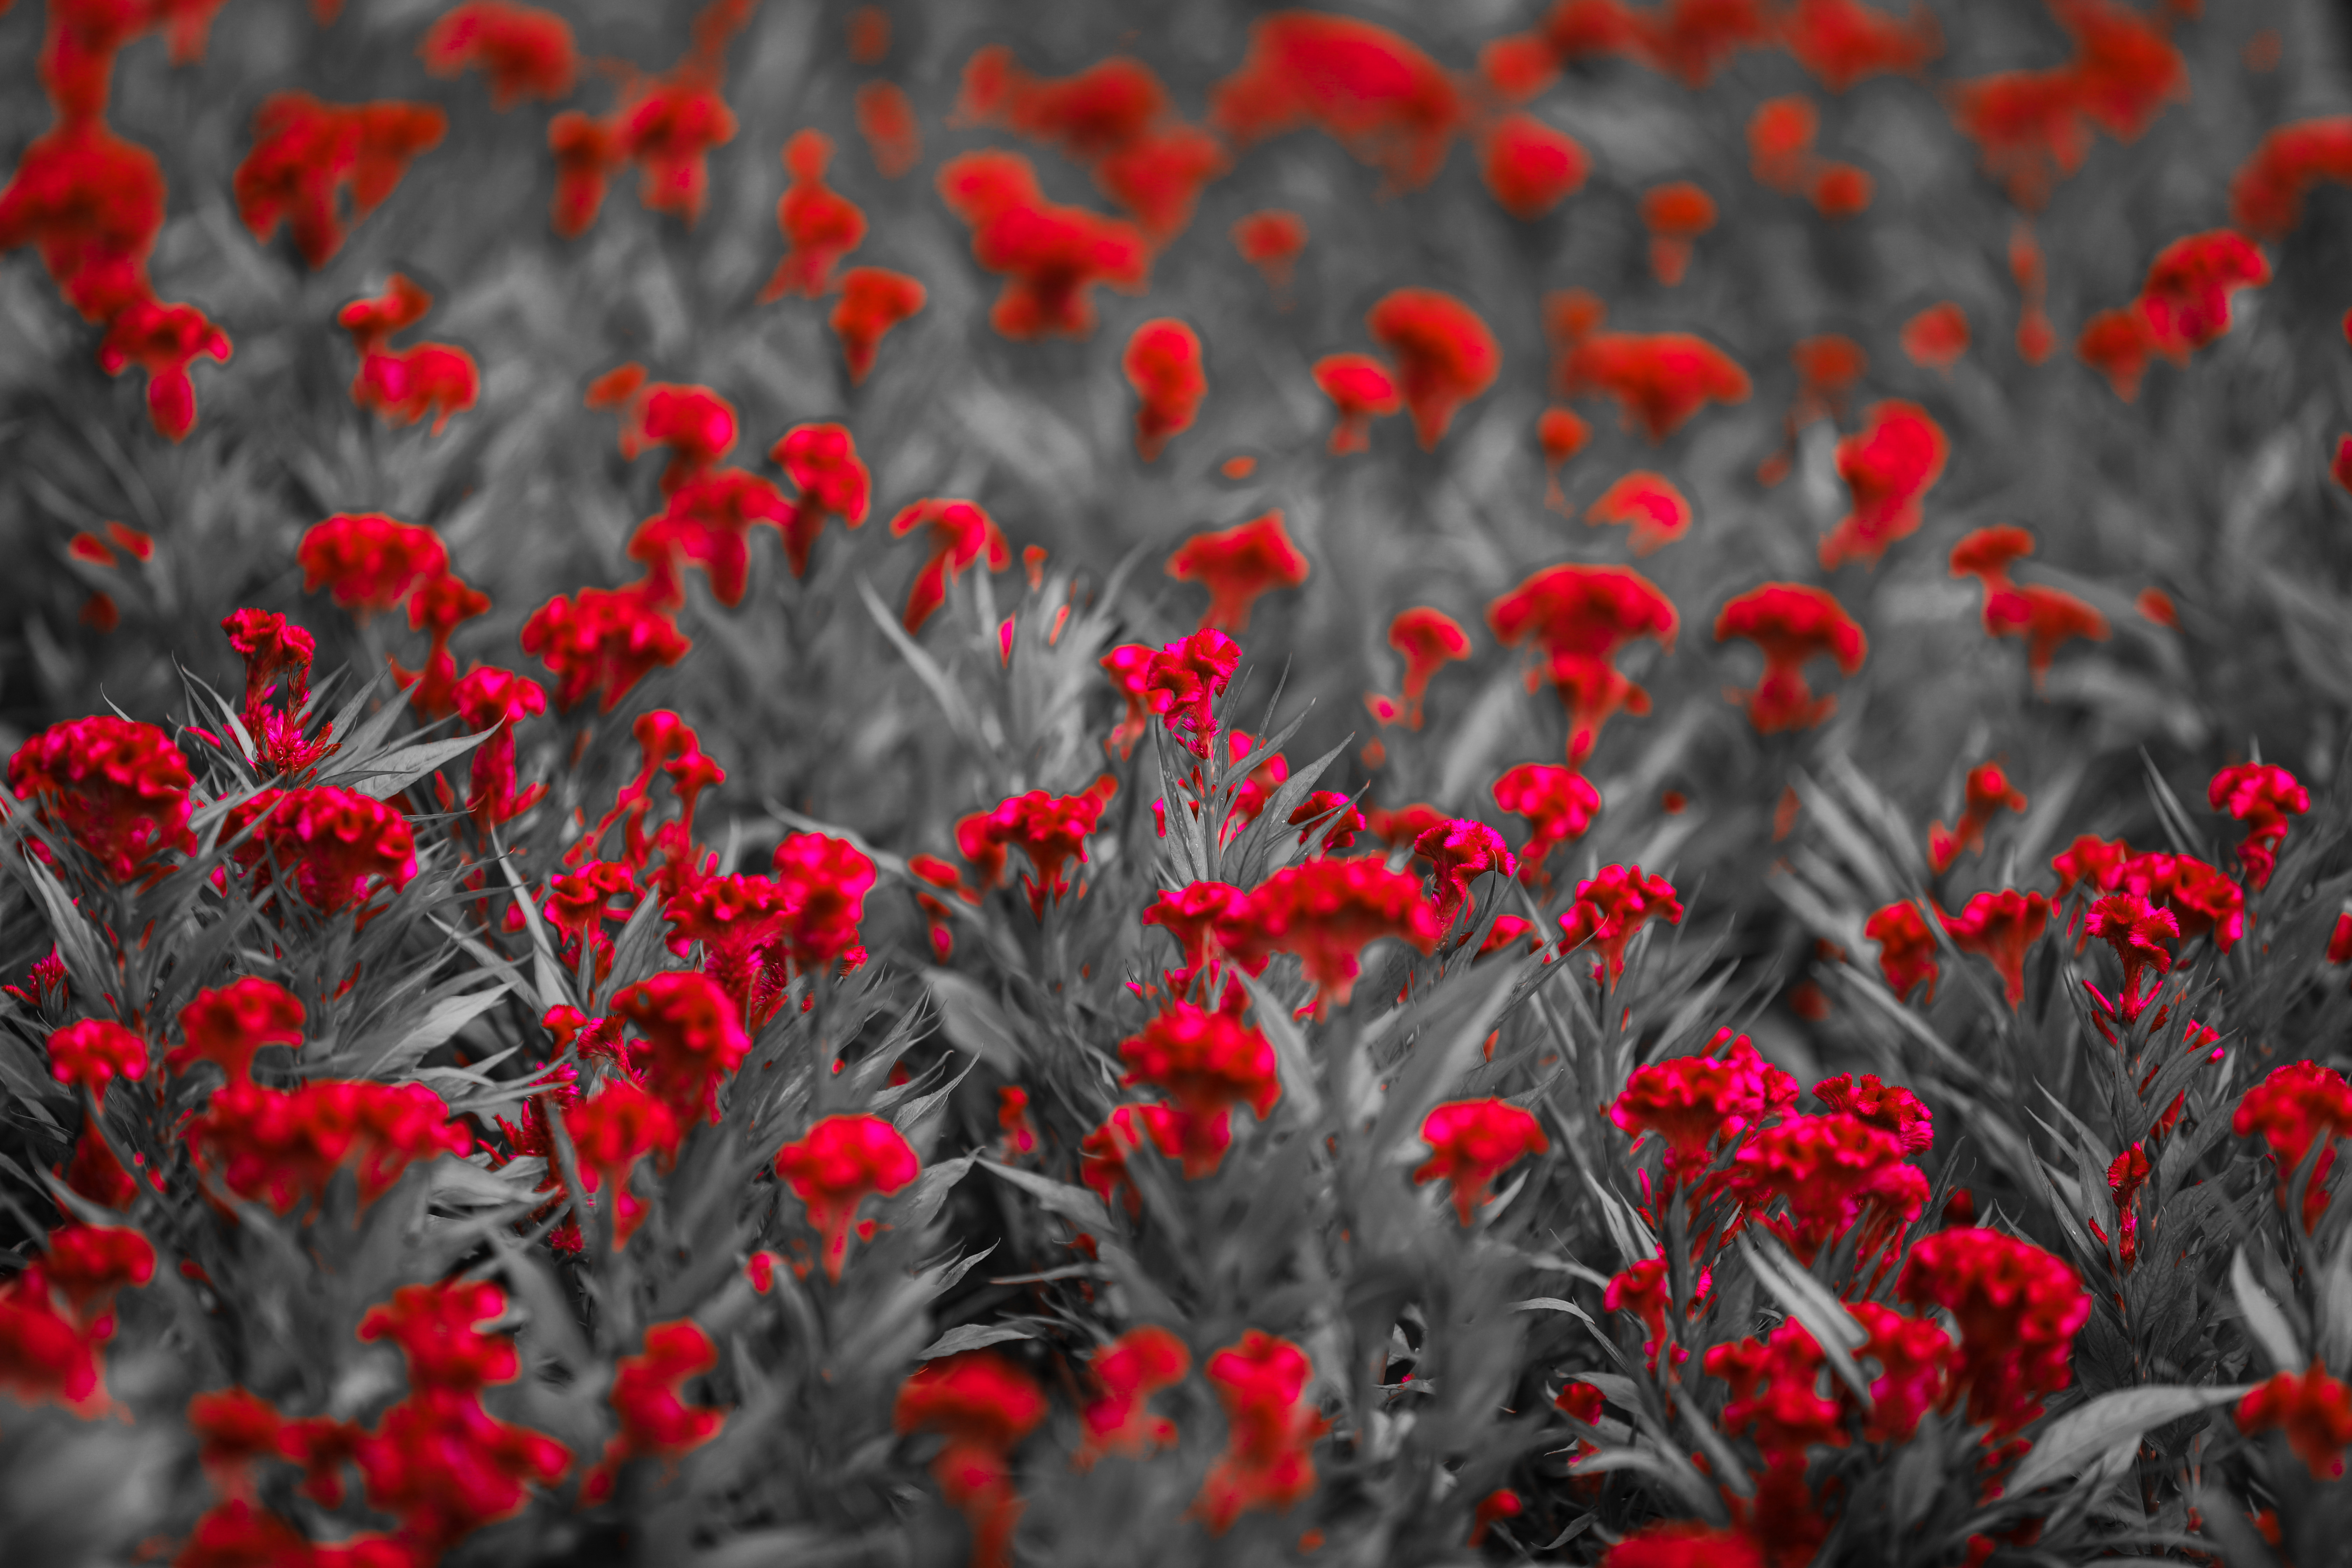 Red Flowers on monochrome field image - Free stock photo - Public ...